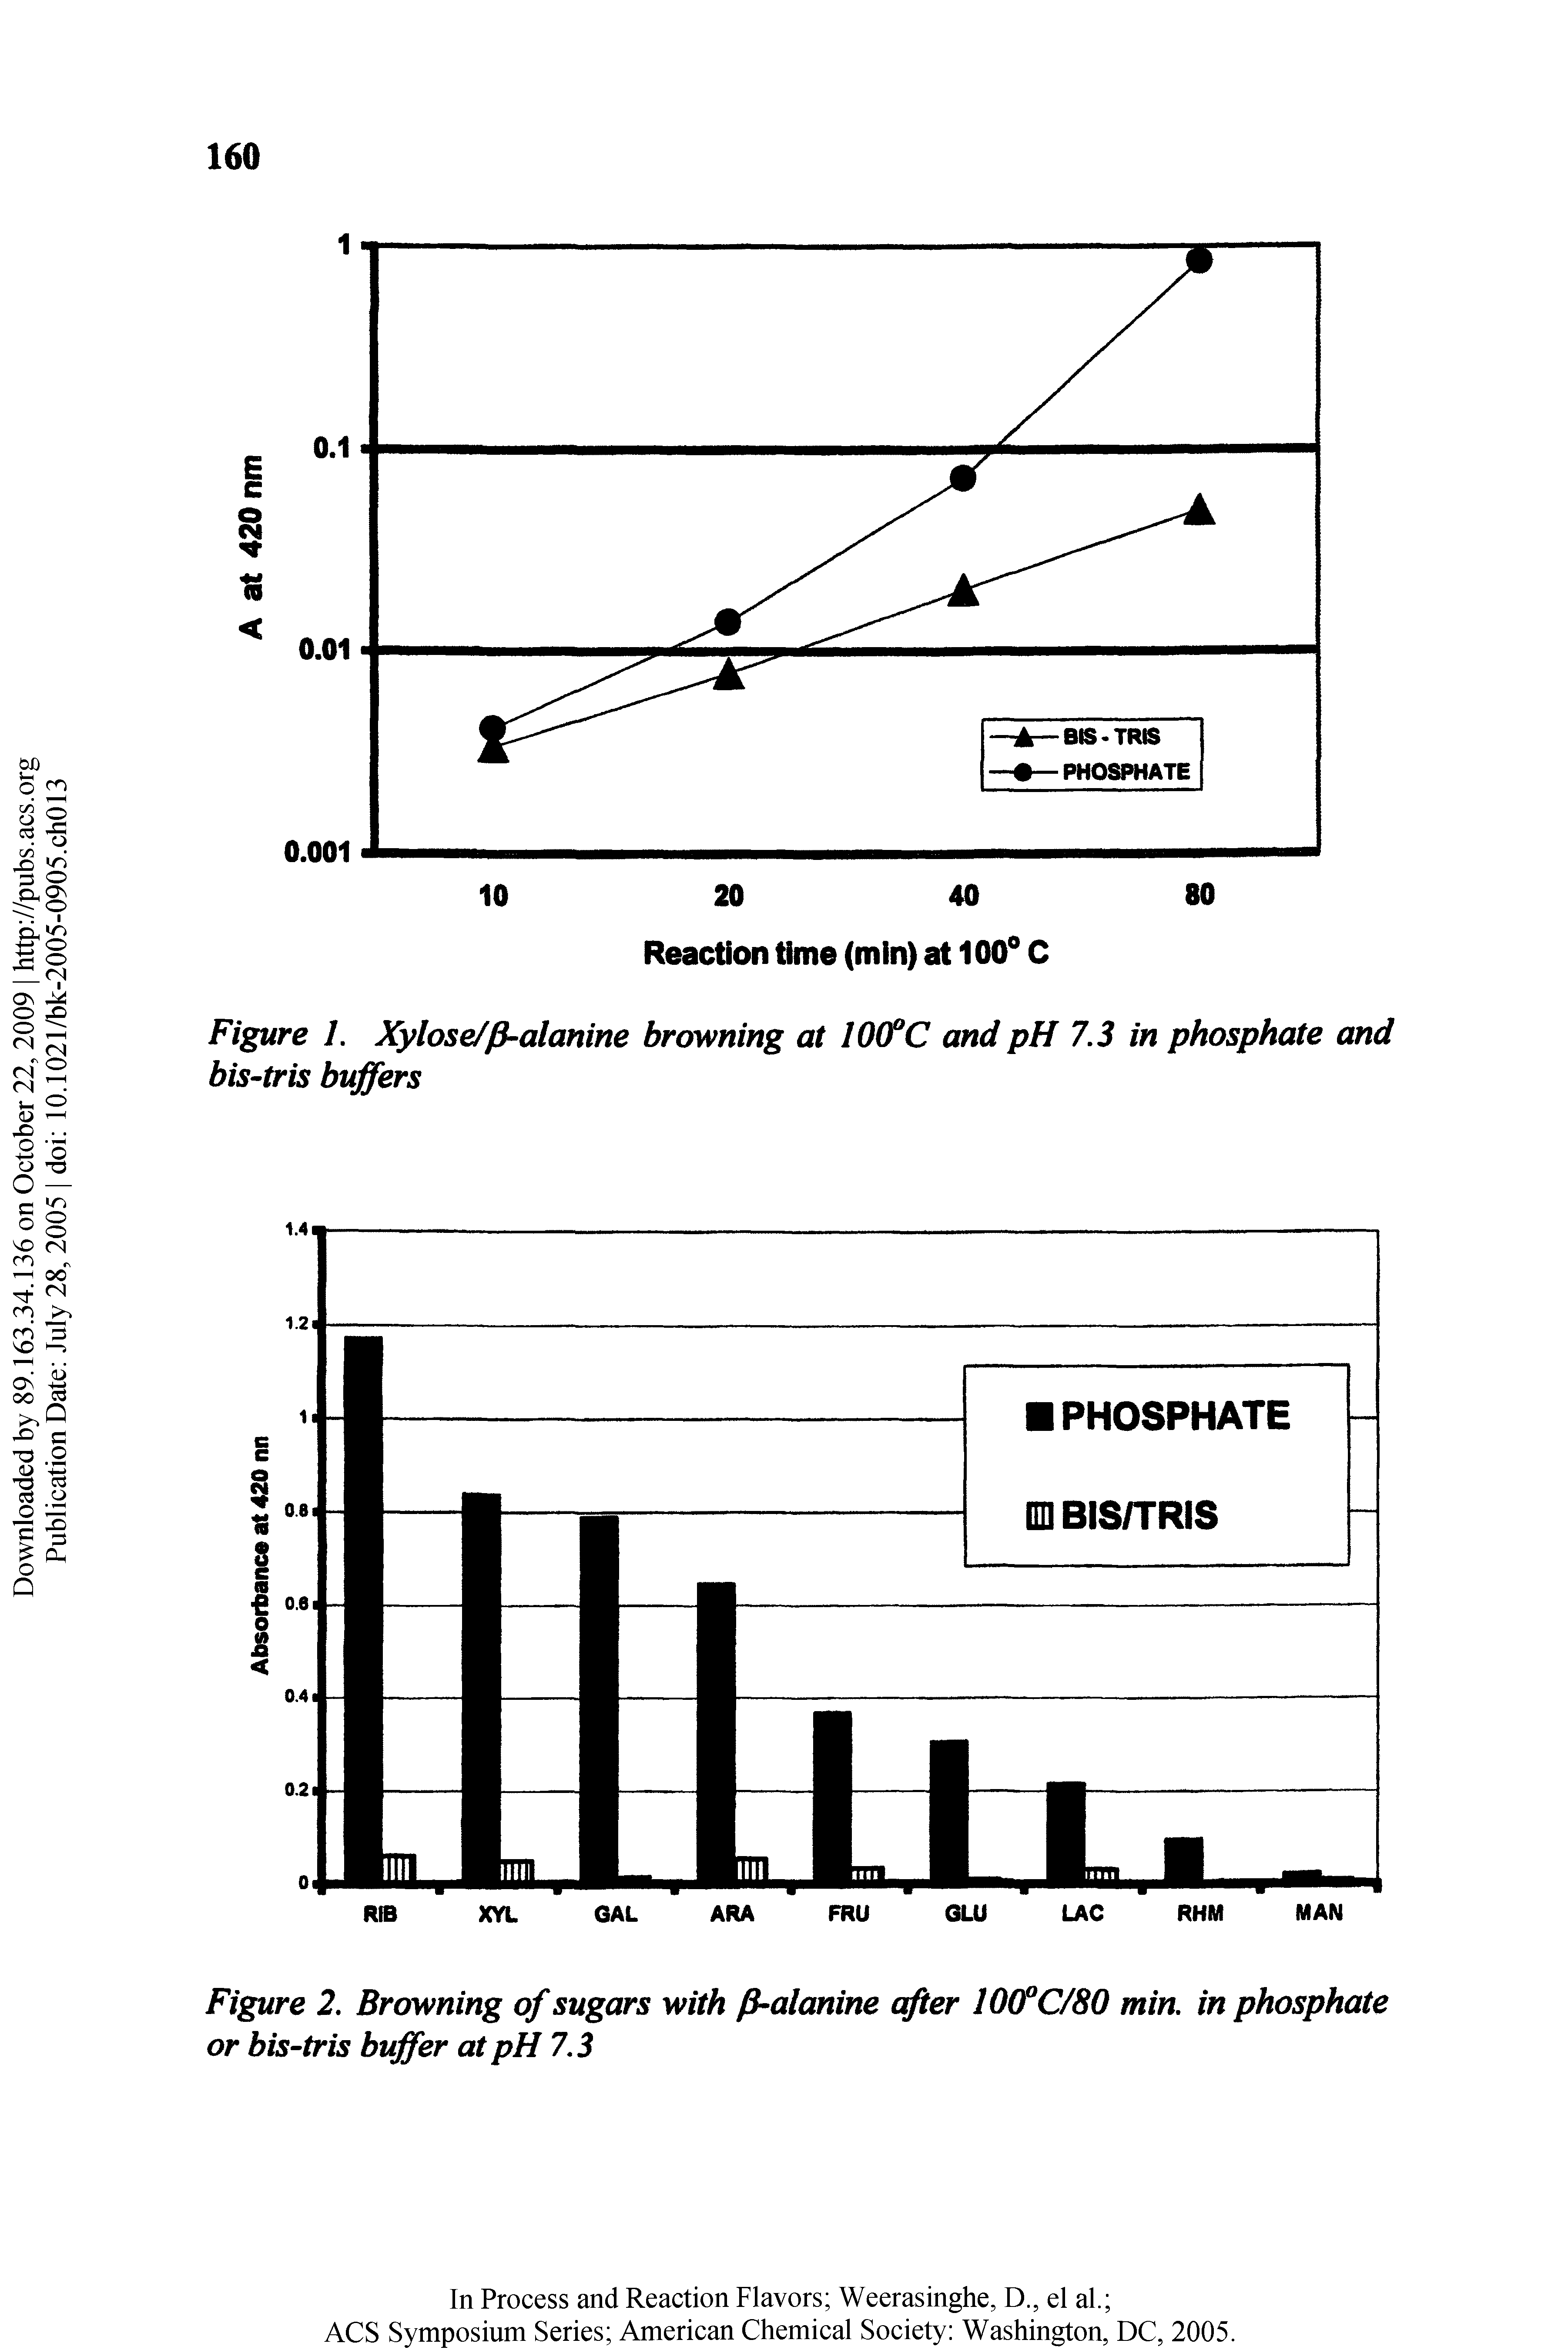 Figure 2. Browning of sugars with /3-alanine after 10(fC/80 min. in phosphate or bis-tris buffer at pH 7.3...